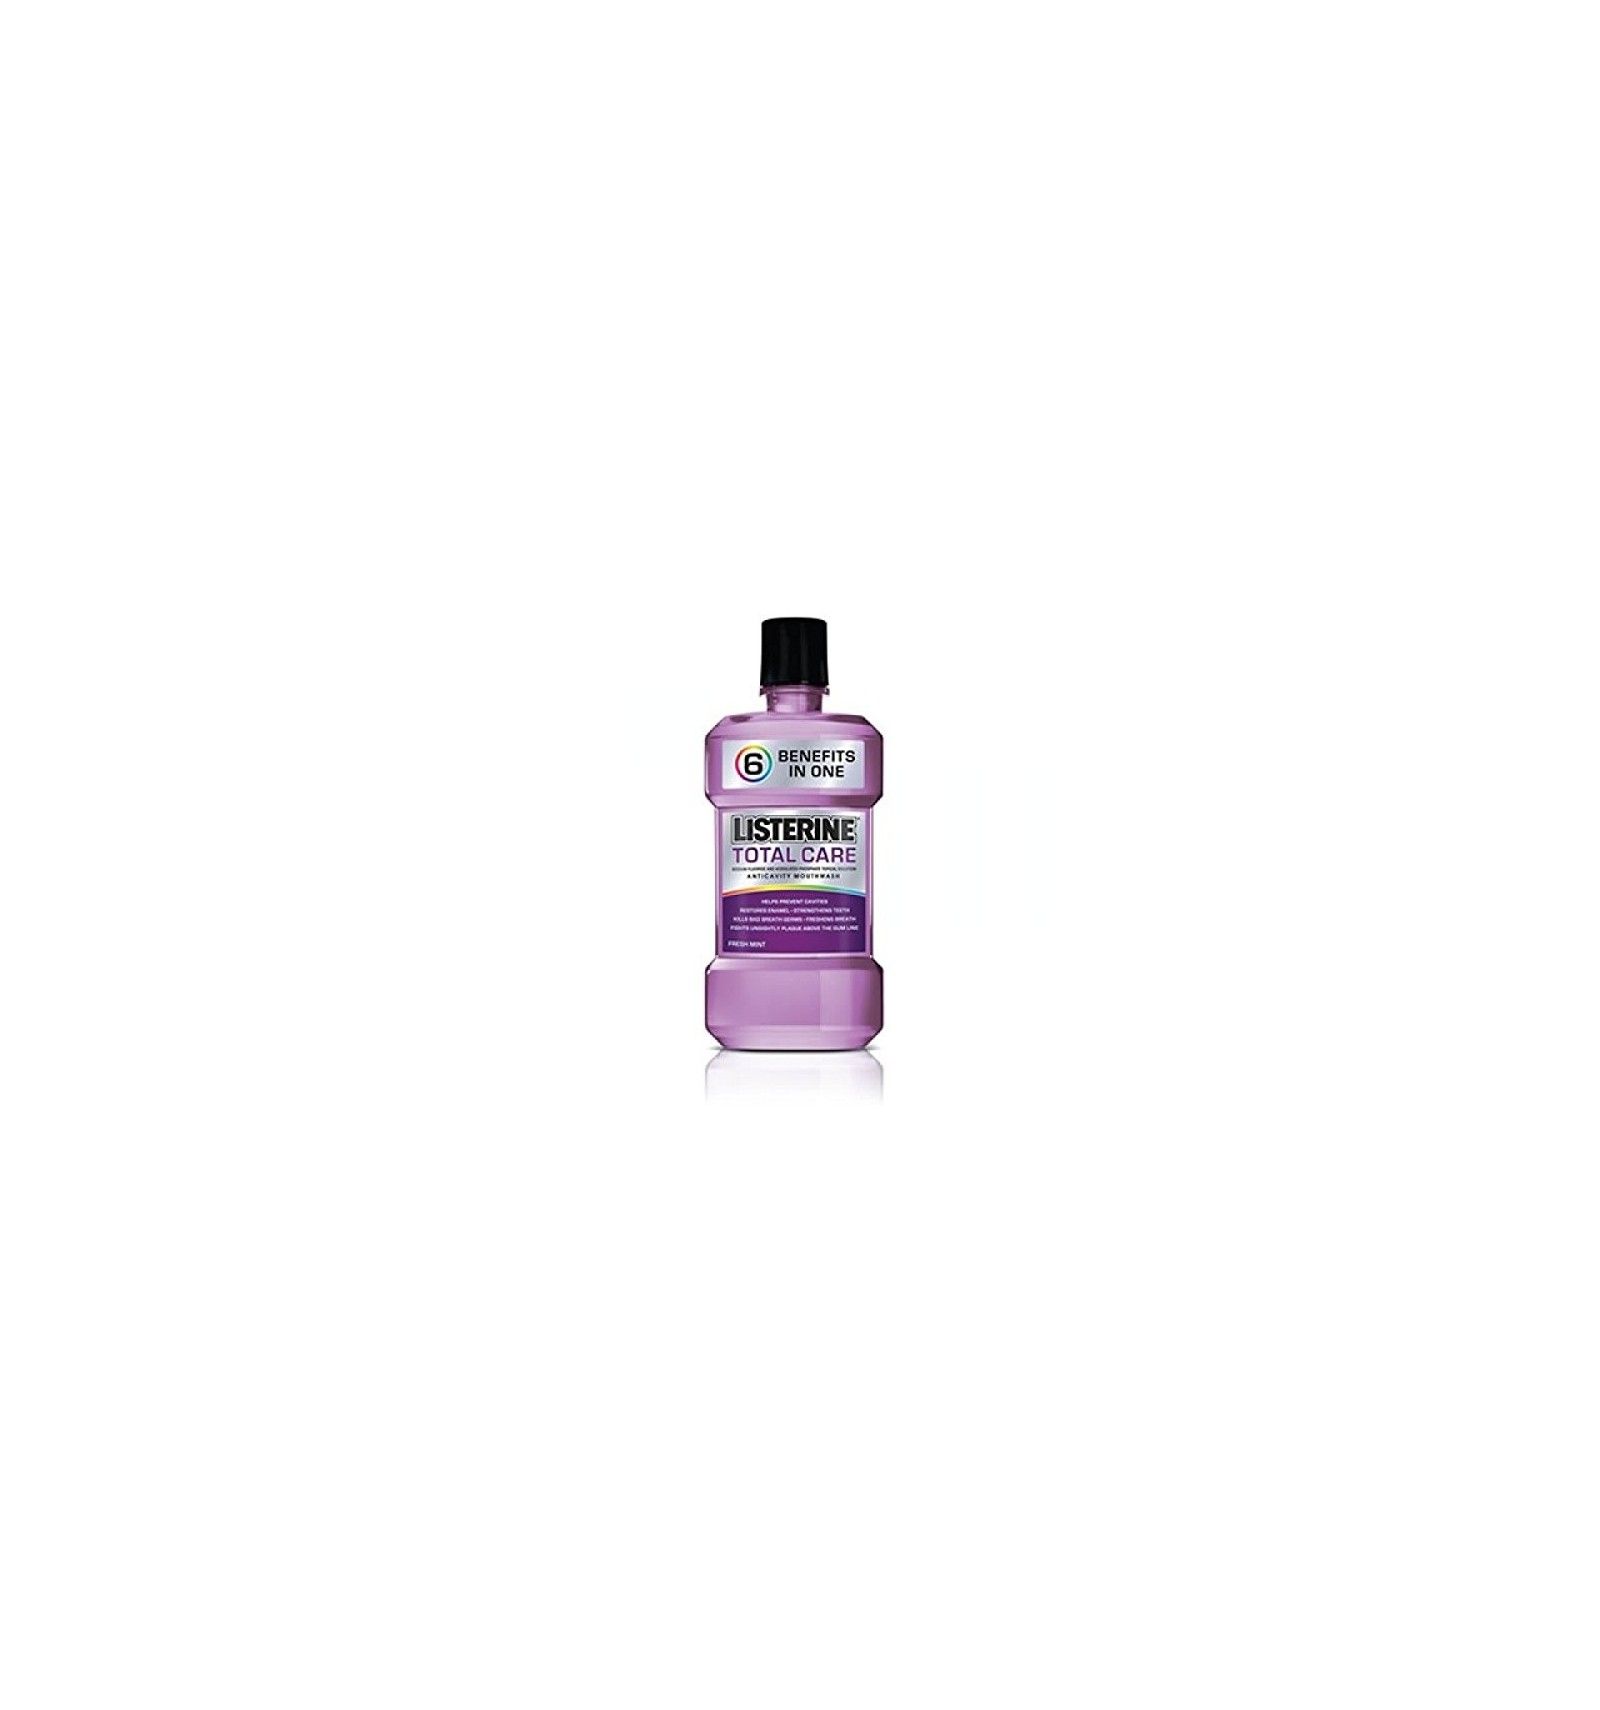 Listerine Antiseptic Mouthwash Total Care 500ml